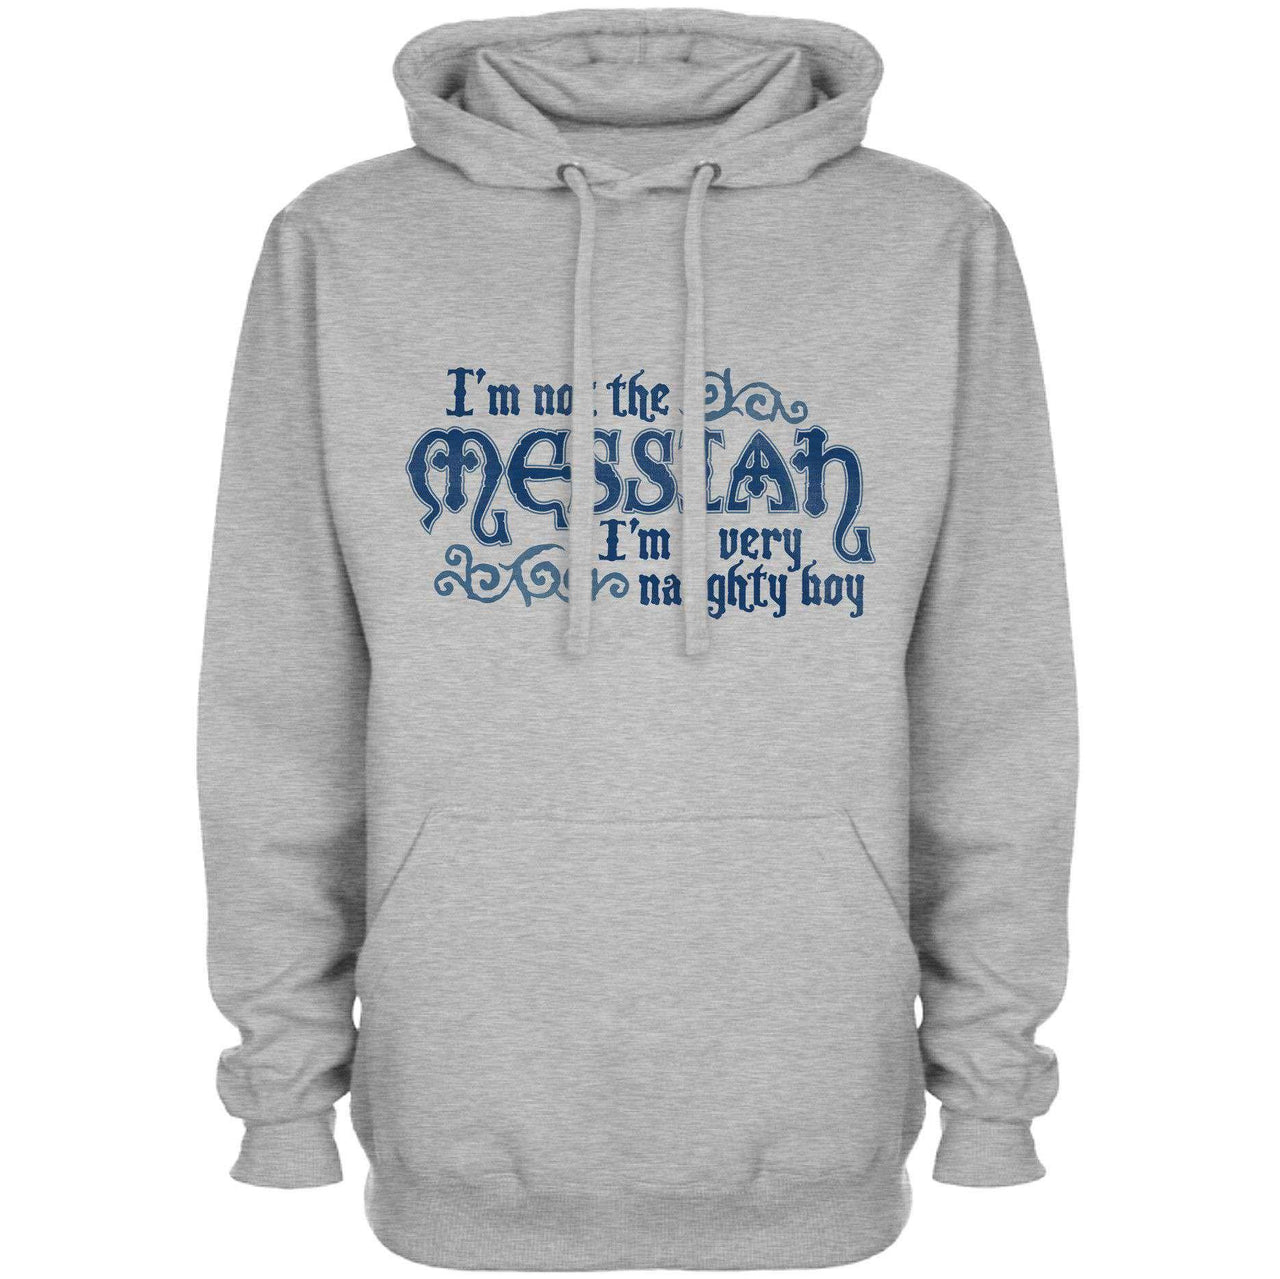 Not The Messiah Unisex Hoodie, Inspired By Monty Python 8Ball